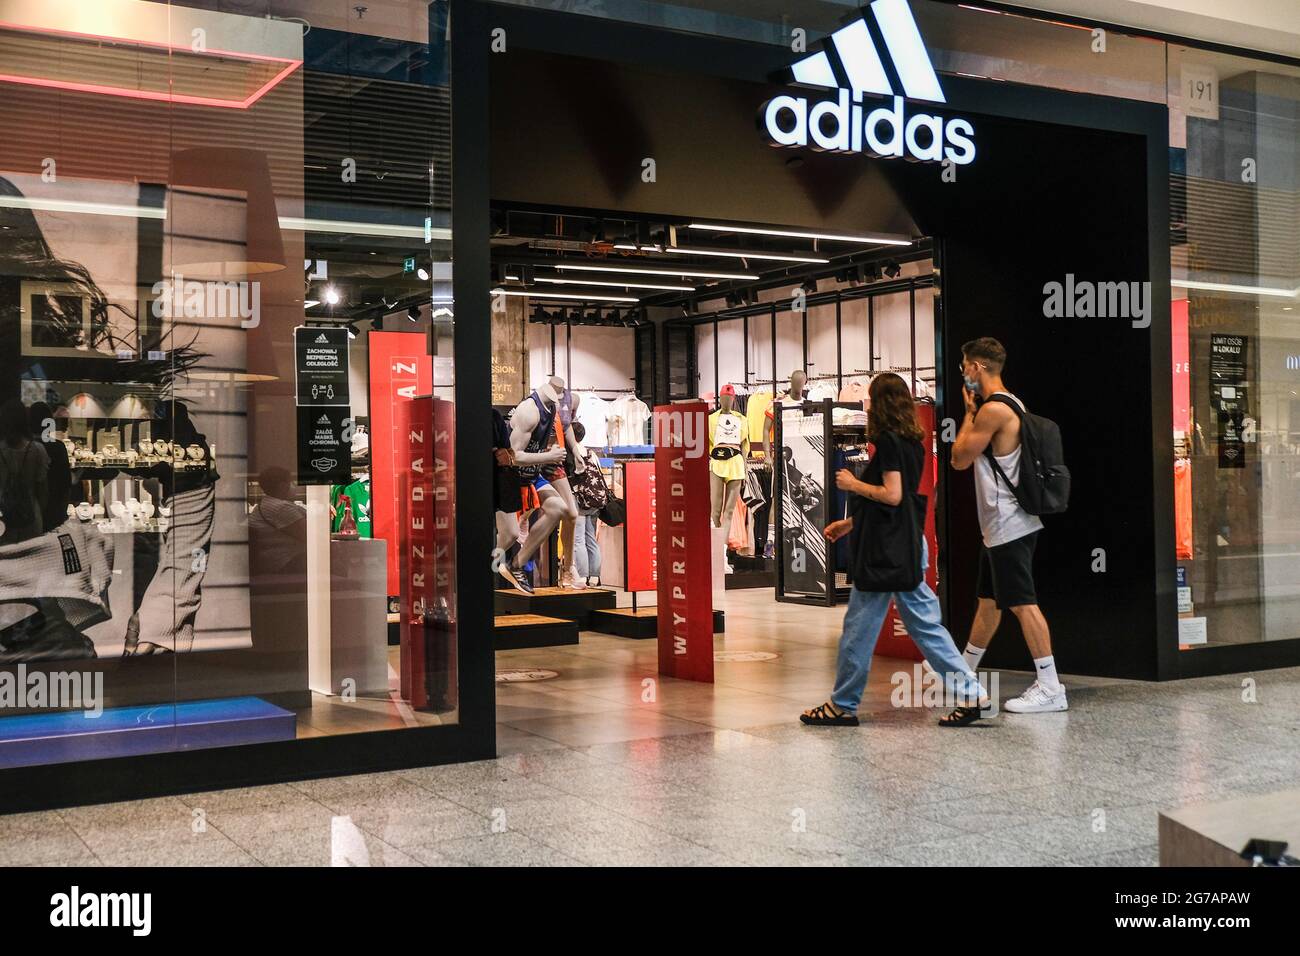 Krakow, Poland. 12th July, 2021. People seen entering an Adidas shop inside  a shopping mall. Credit: Omar Marques/SOPA Images/ZUMA Wire/Alamy Live News  Stock Photo - Alamy